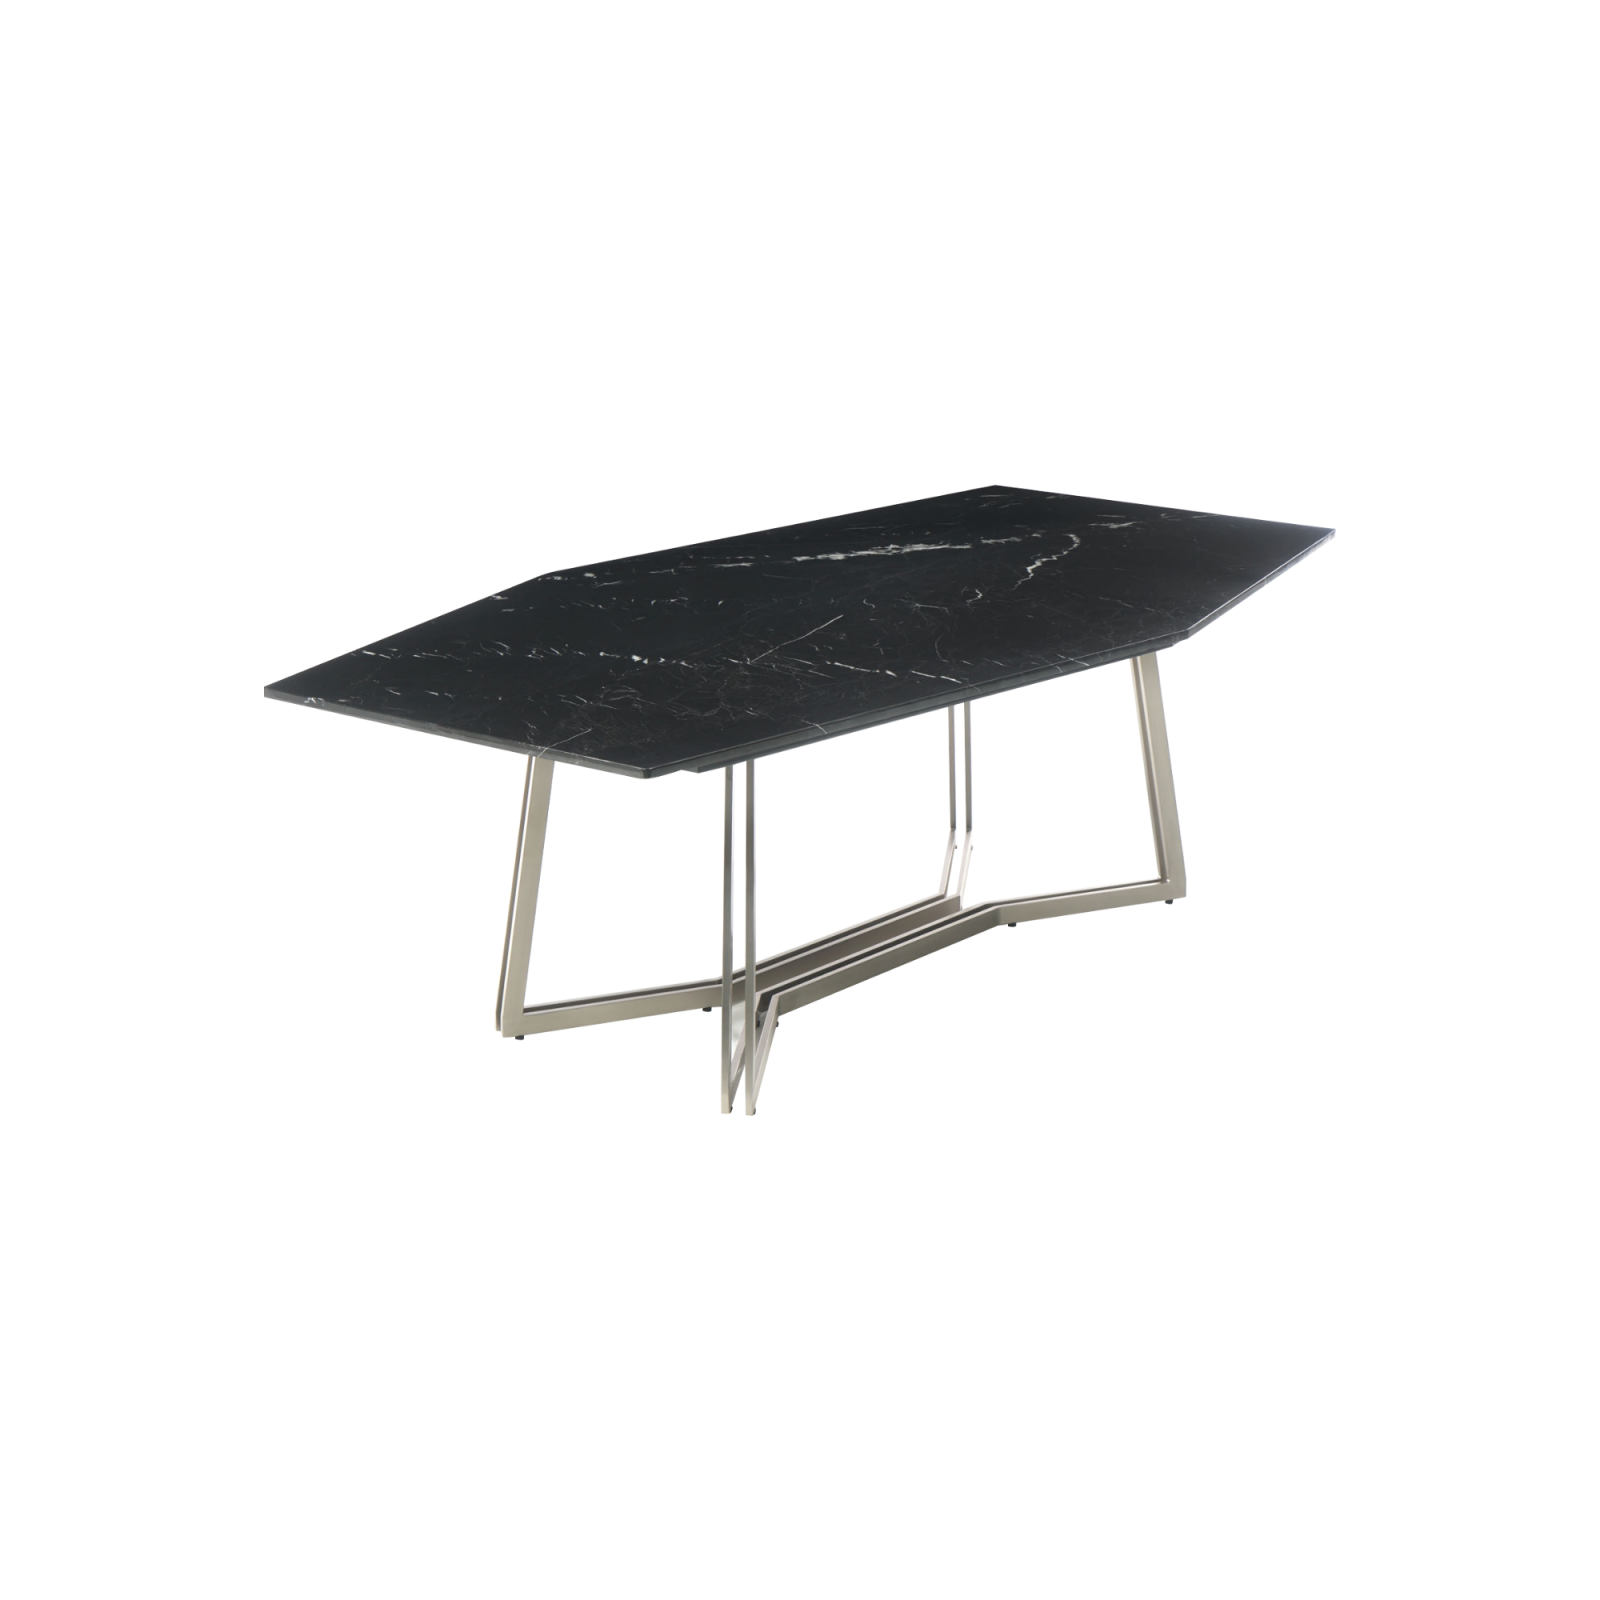 luxurious Hexagon table which is made from black marble standing on a white background.